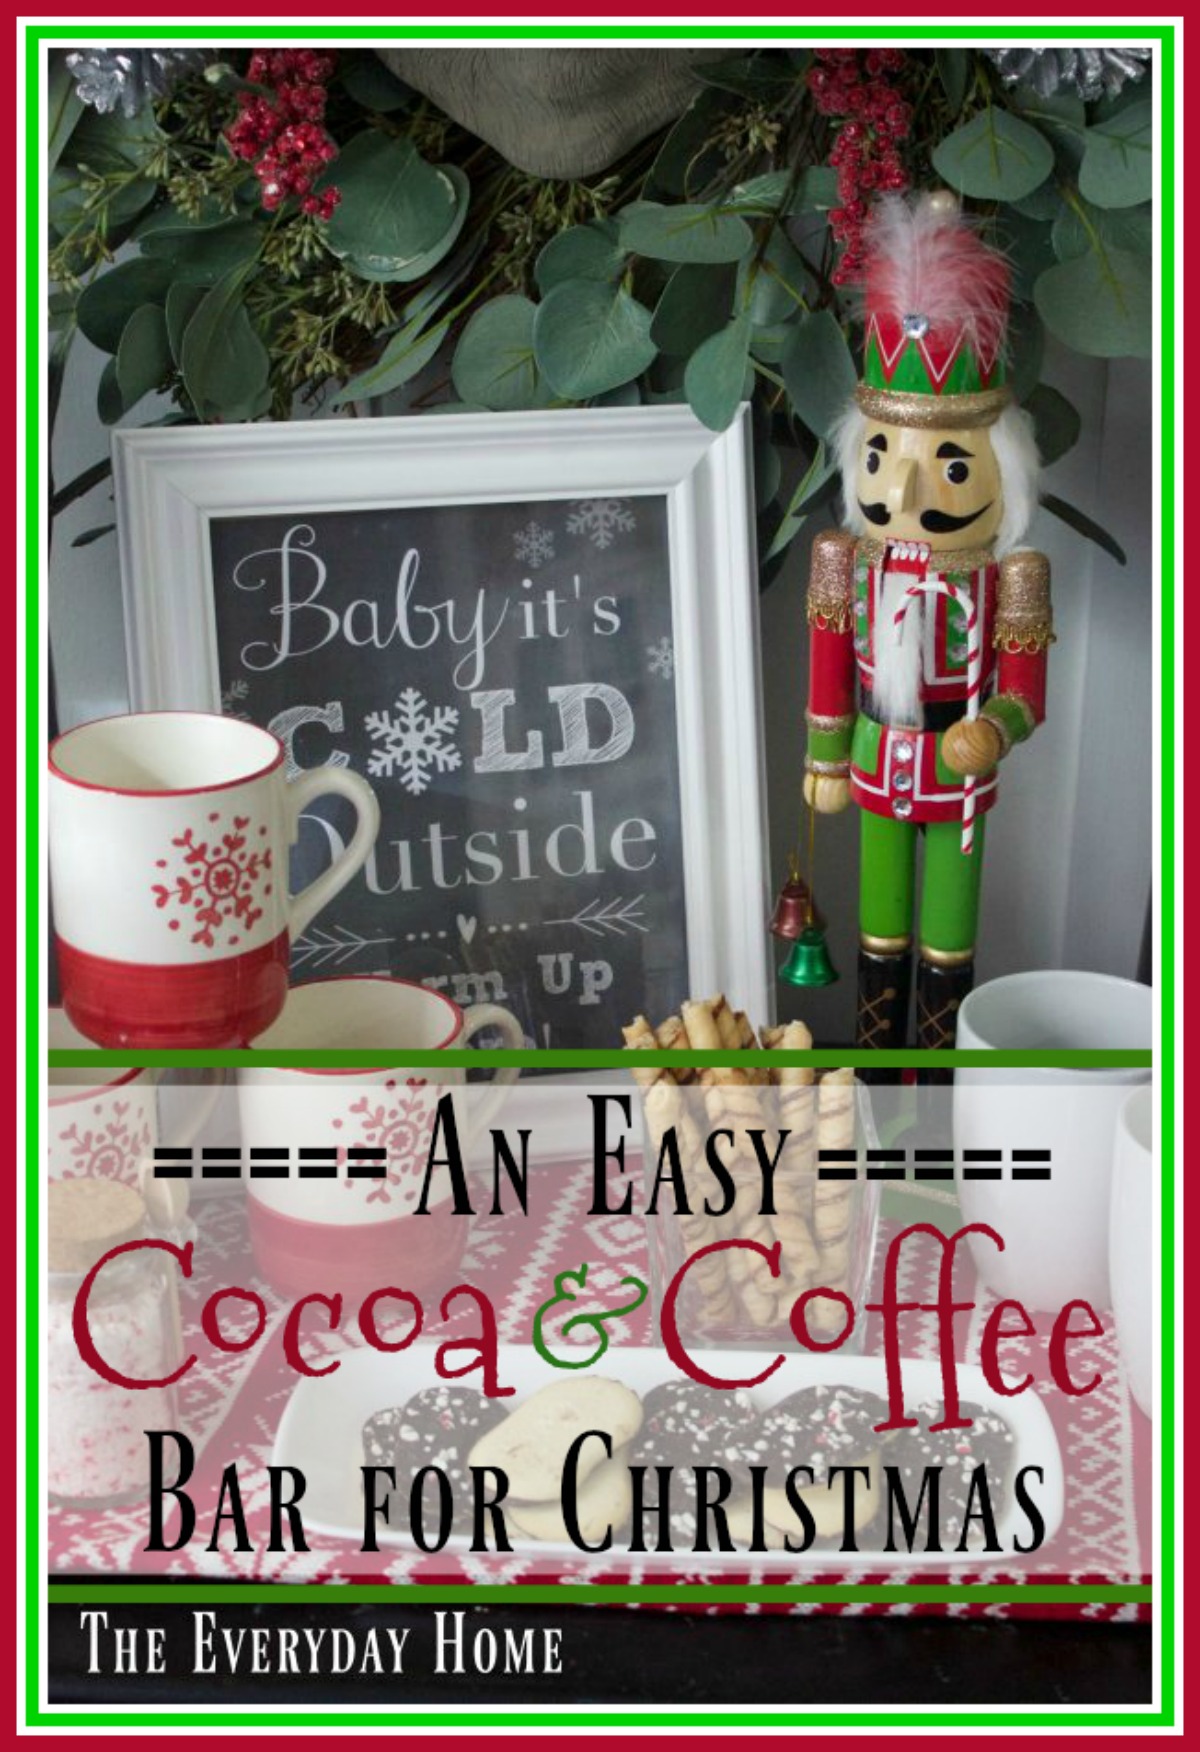 an-easy-cocoa-and-coffee-bar-for-christmas